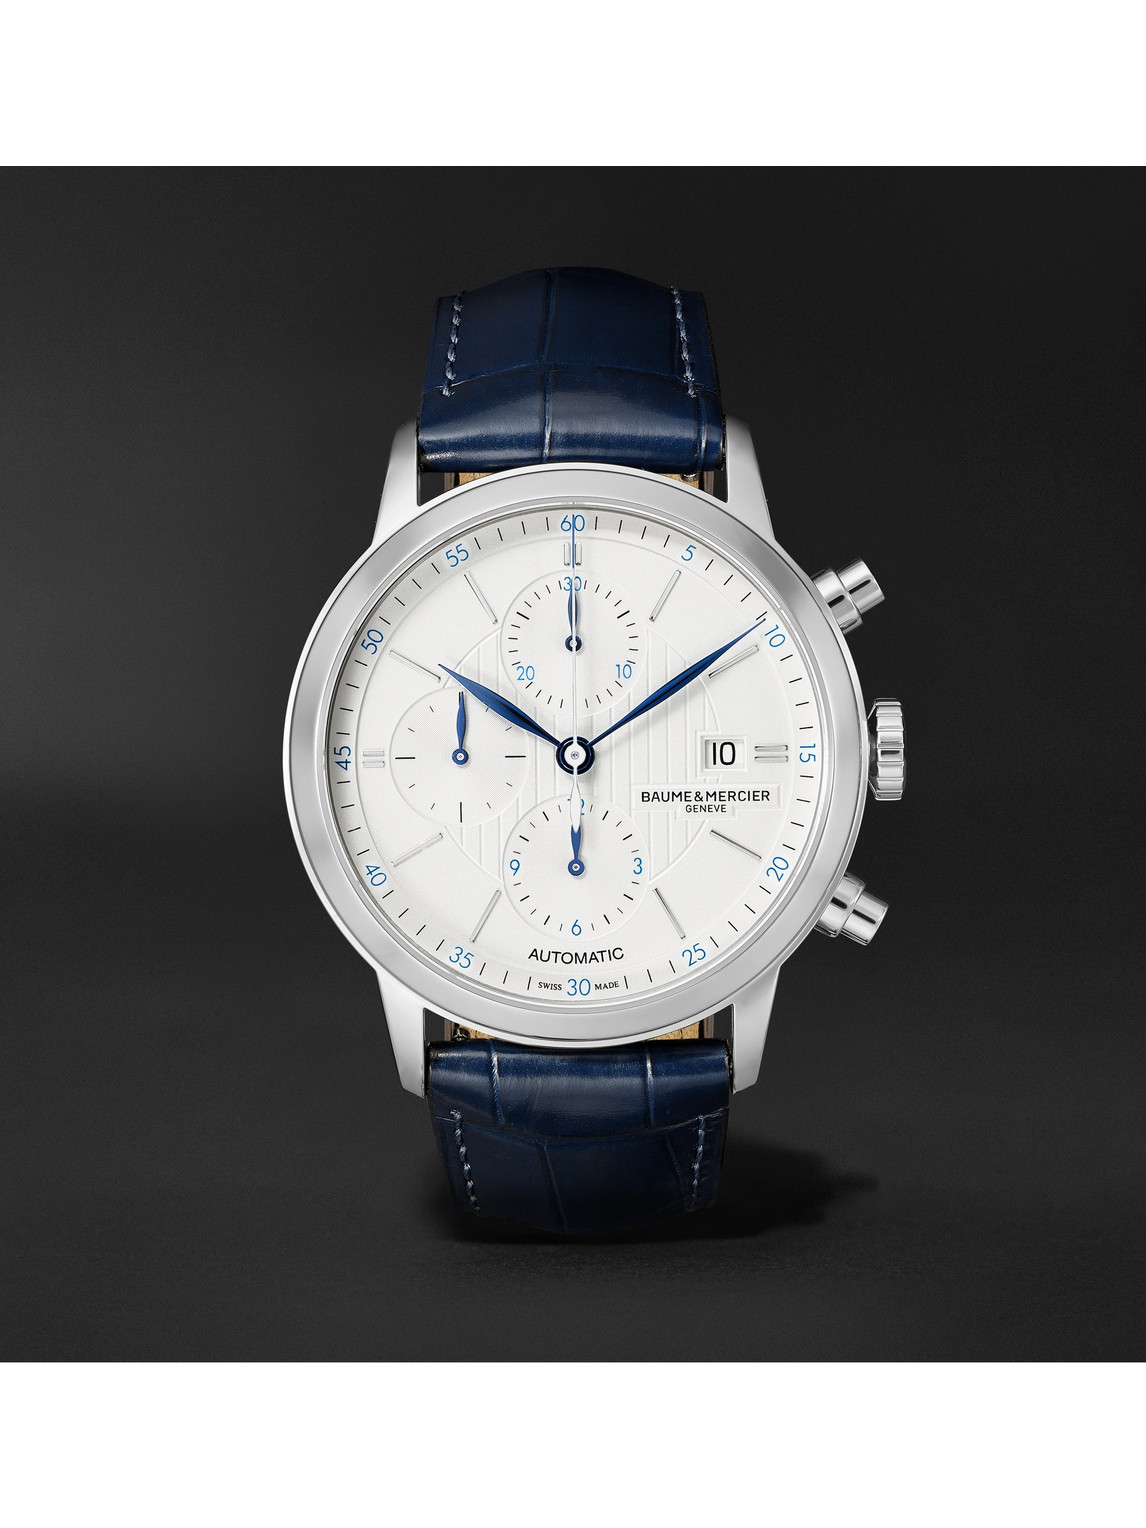 Classima Automatic Chronograph 42mm Steel and Alligator Watch, Ref. No. M0A10330